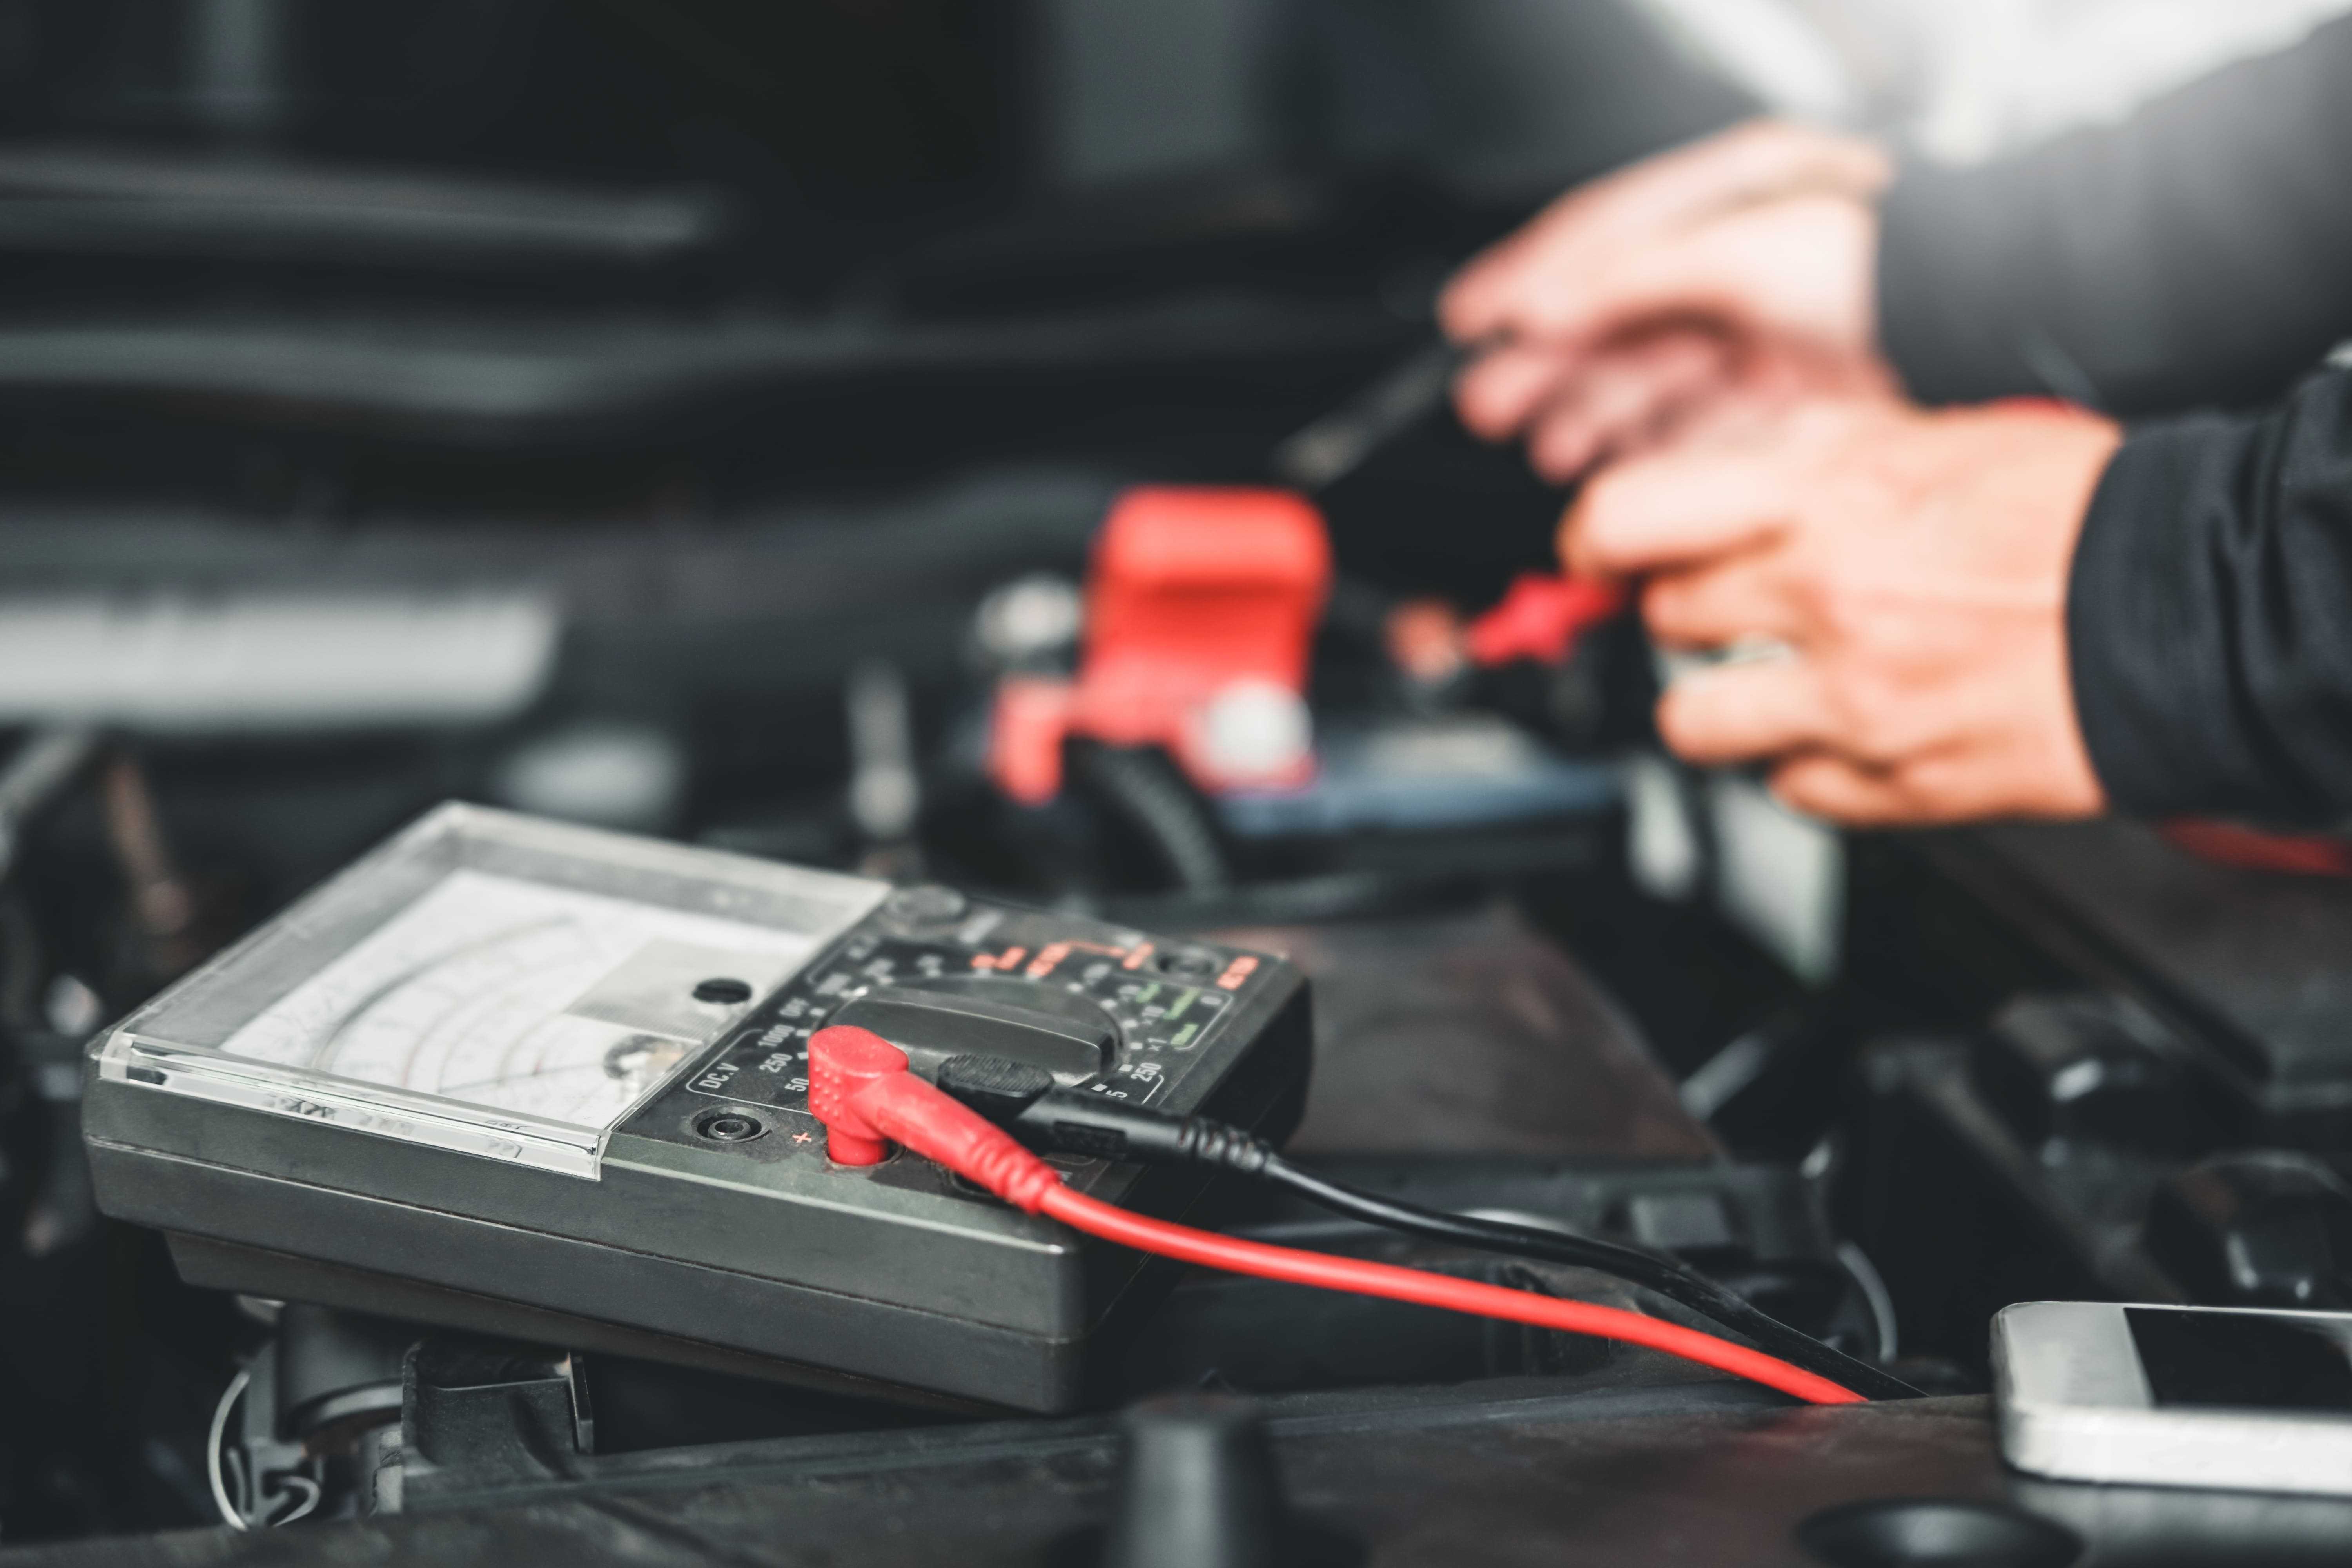 It’s important to test your battery regularly. Proactively testing it twice a year will help reduce your chances of failure.